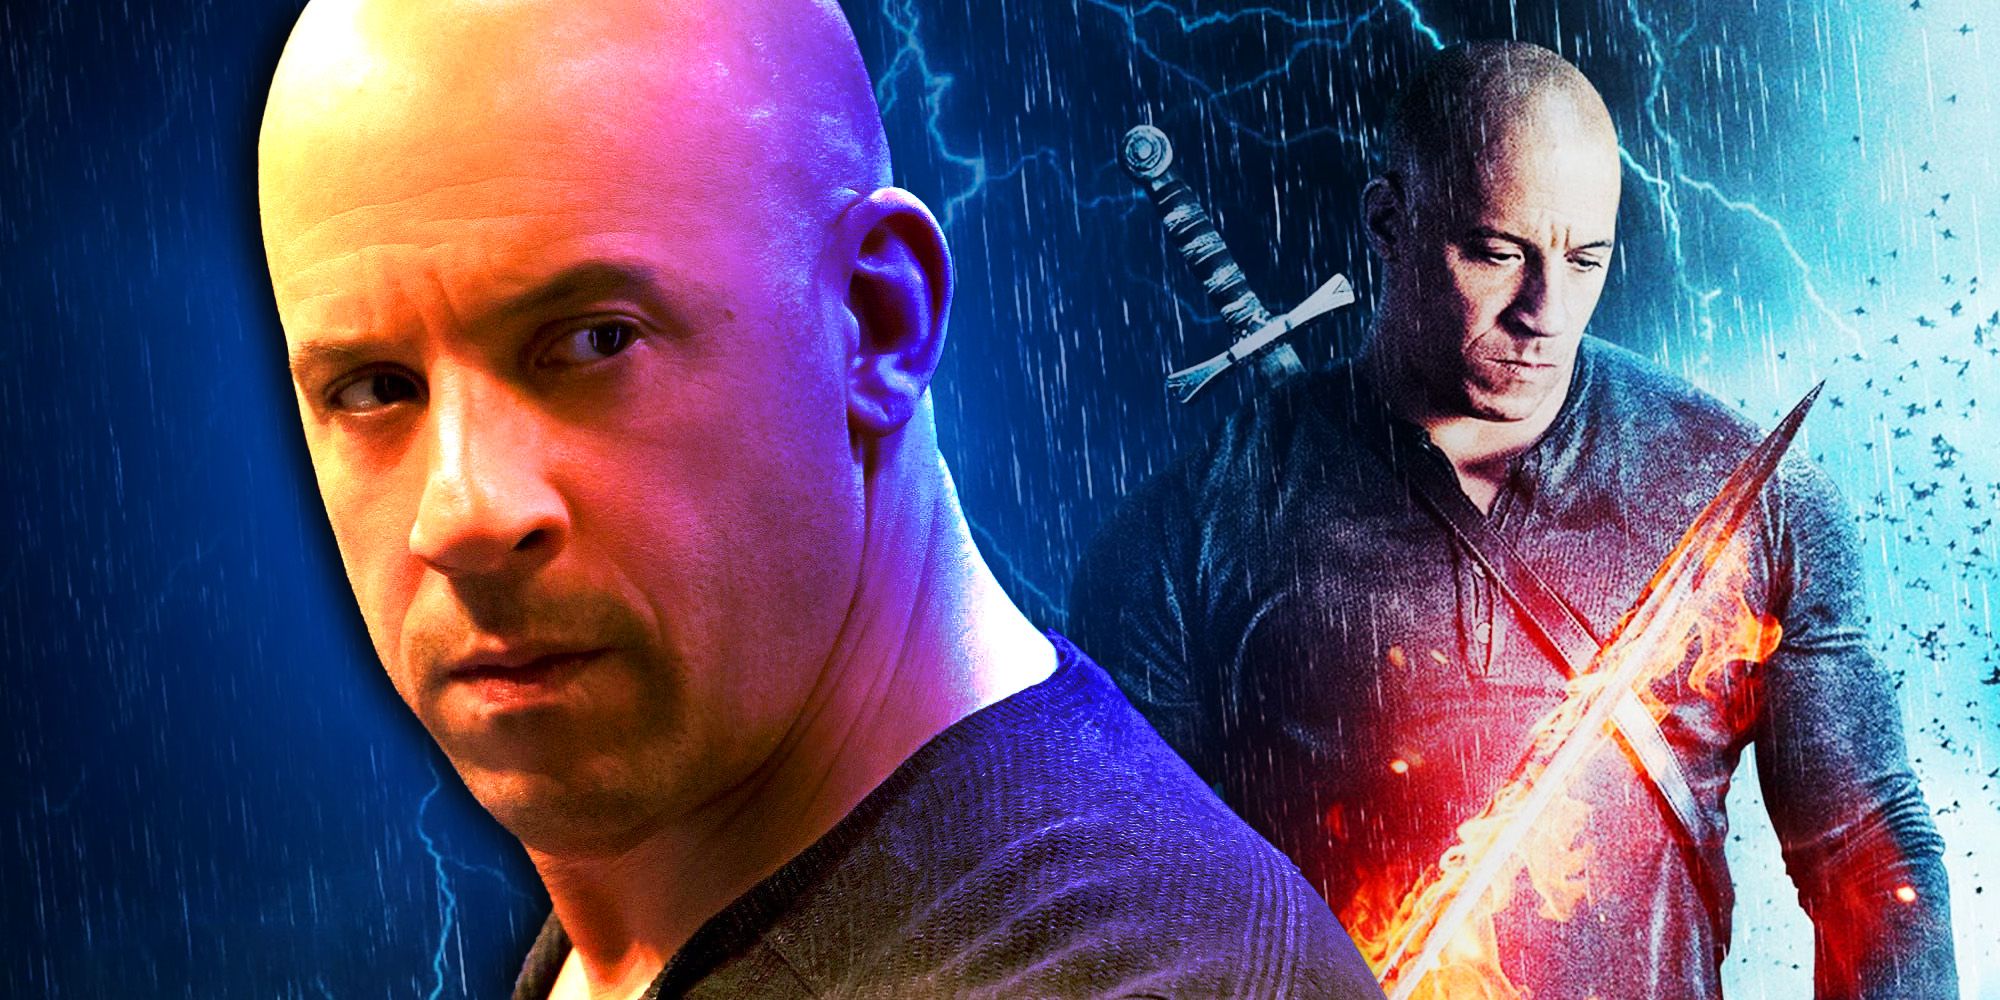 A blended image features Vin Diesel in modern attire and in a coat with a scabbard in The last Witch Hunter